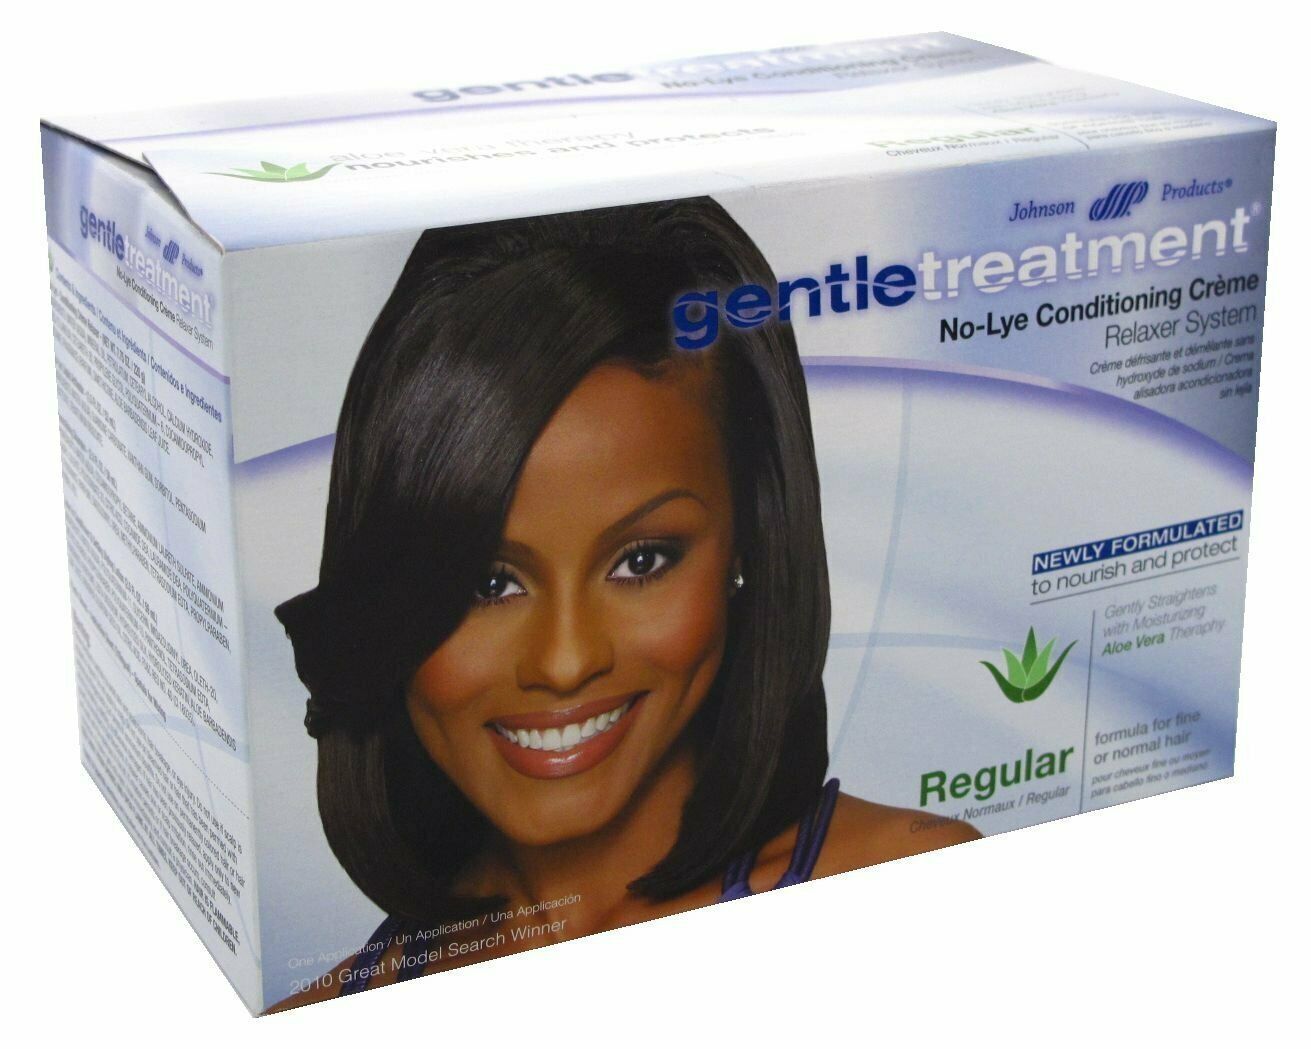 Gentle Treatment No-lye Conditioning Creme Relaxer System, Regular 1 Ea